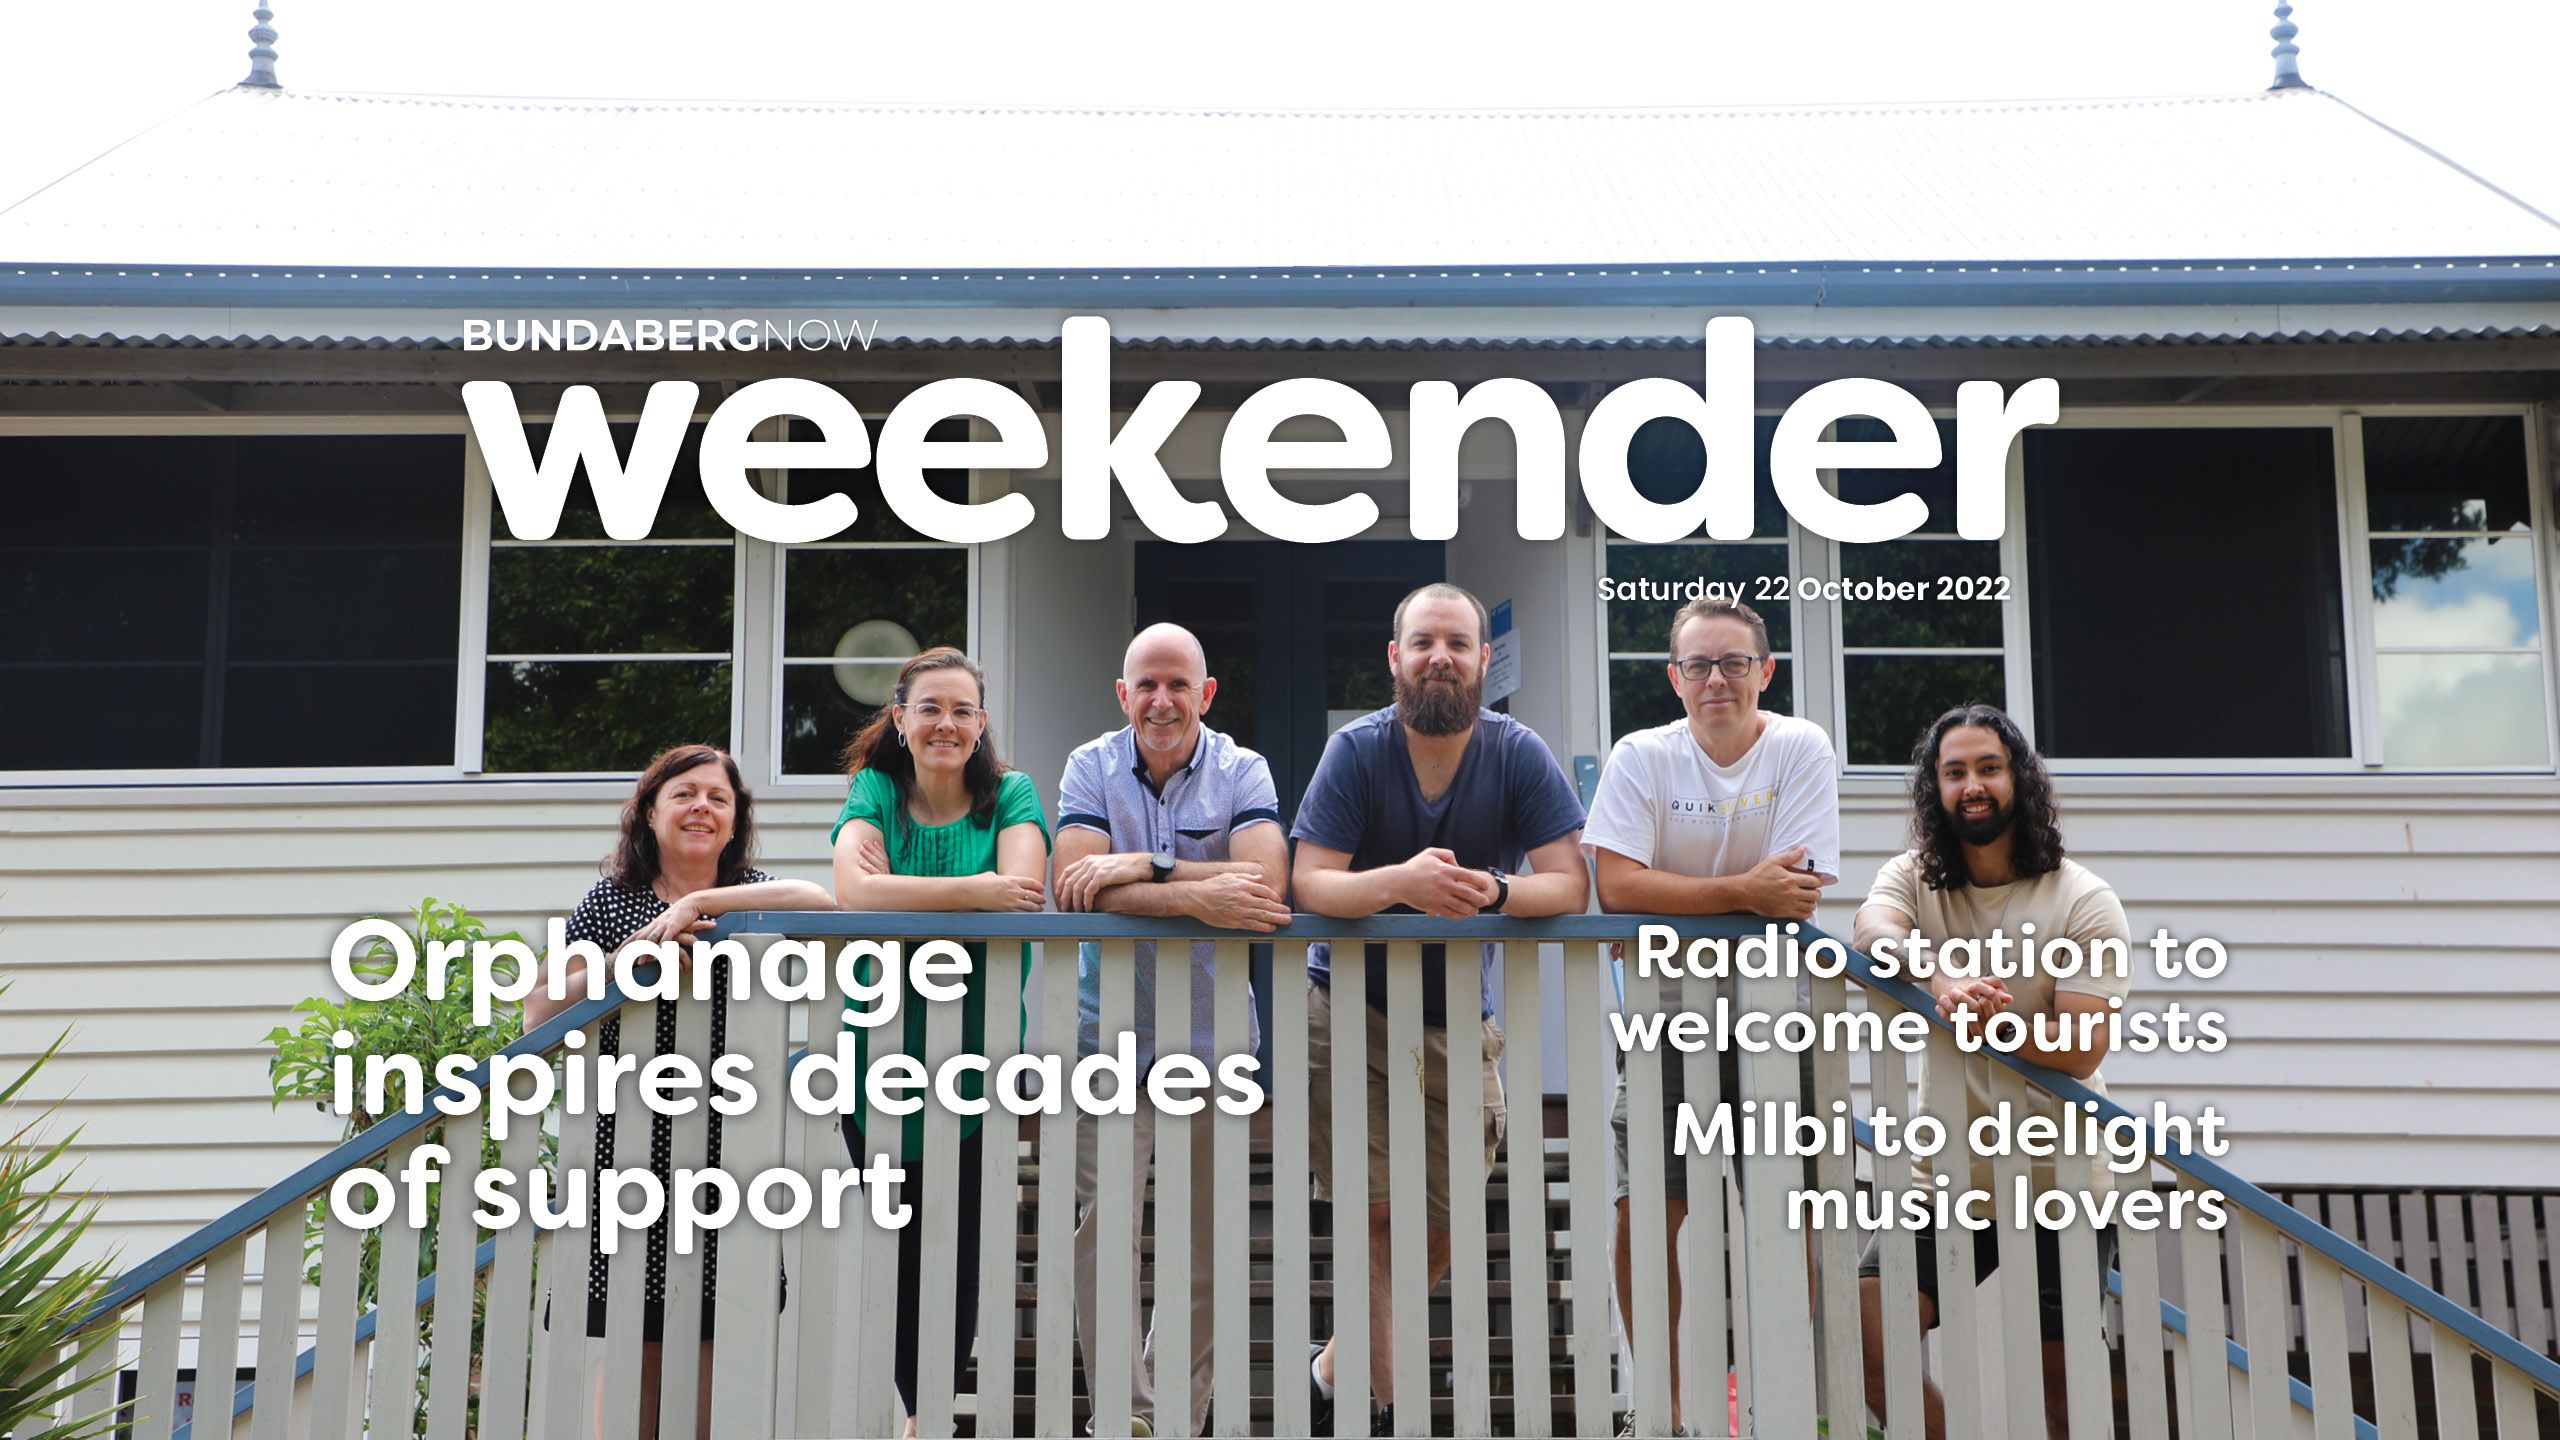 Weekender: Orphanage inspired decades of support